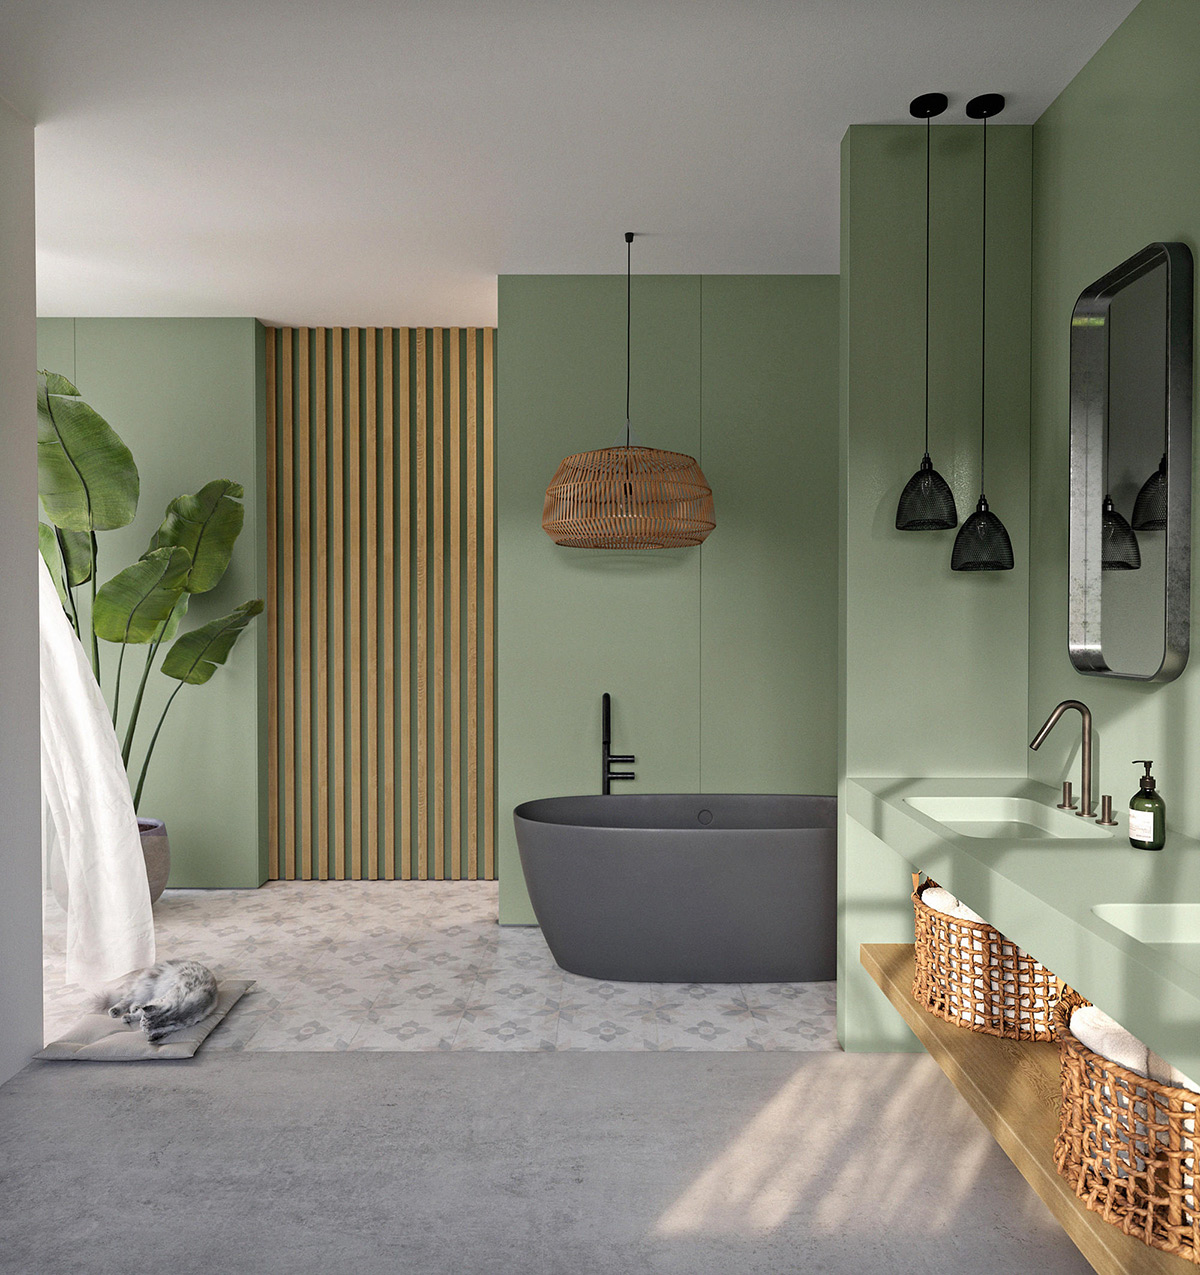 Wicker towel baskets, a rattan pendant light shade, and wood-slatted accents give this gray and green bathroom concept a natural, boho essence.